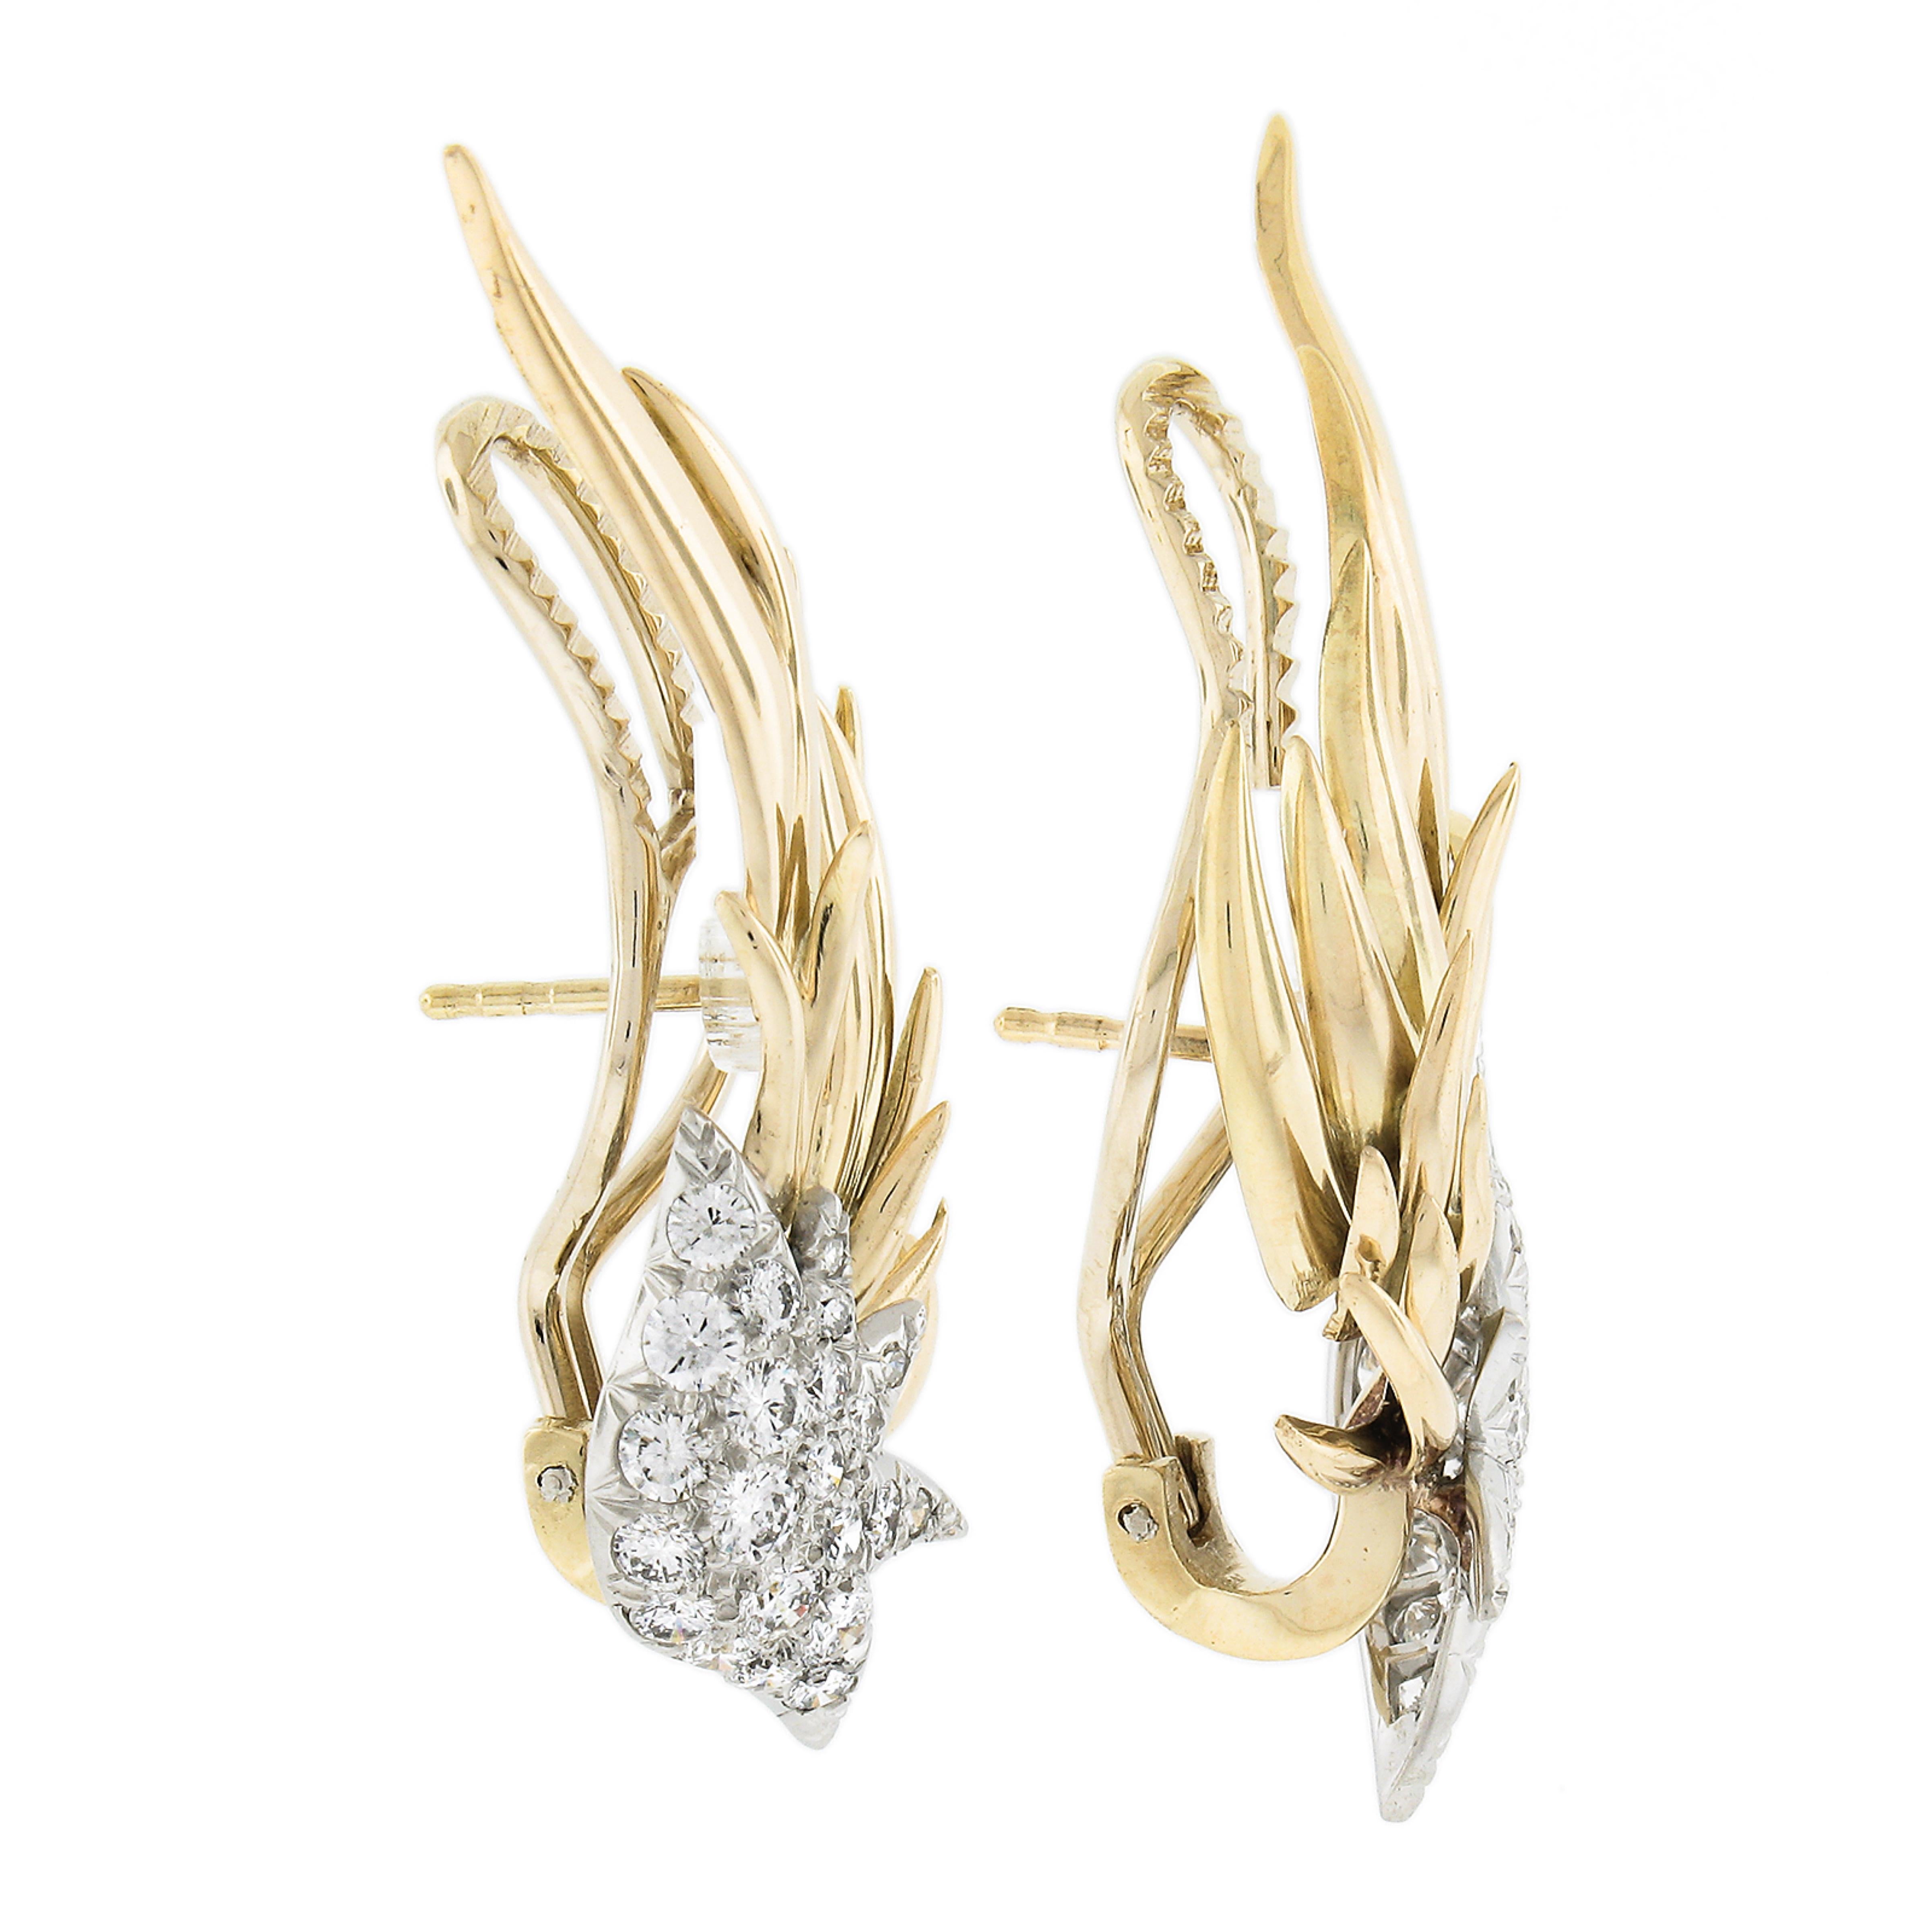 Vintage Tiffany & Co. Schlumberger 18K Gold & Platinum Diamond Flame Earrings In Excellent Condition For Sale In Montclair, NJ